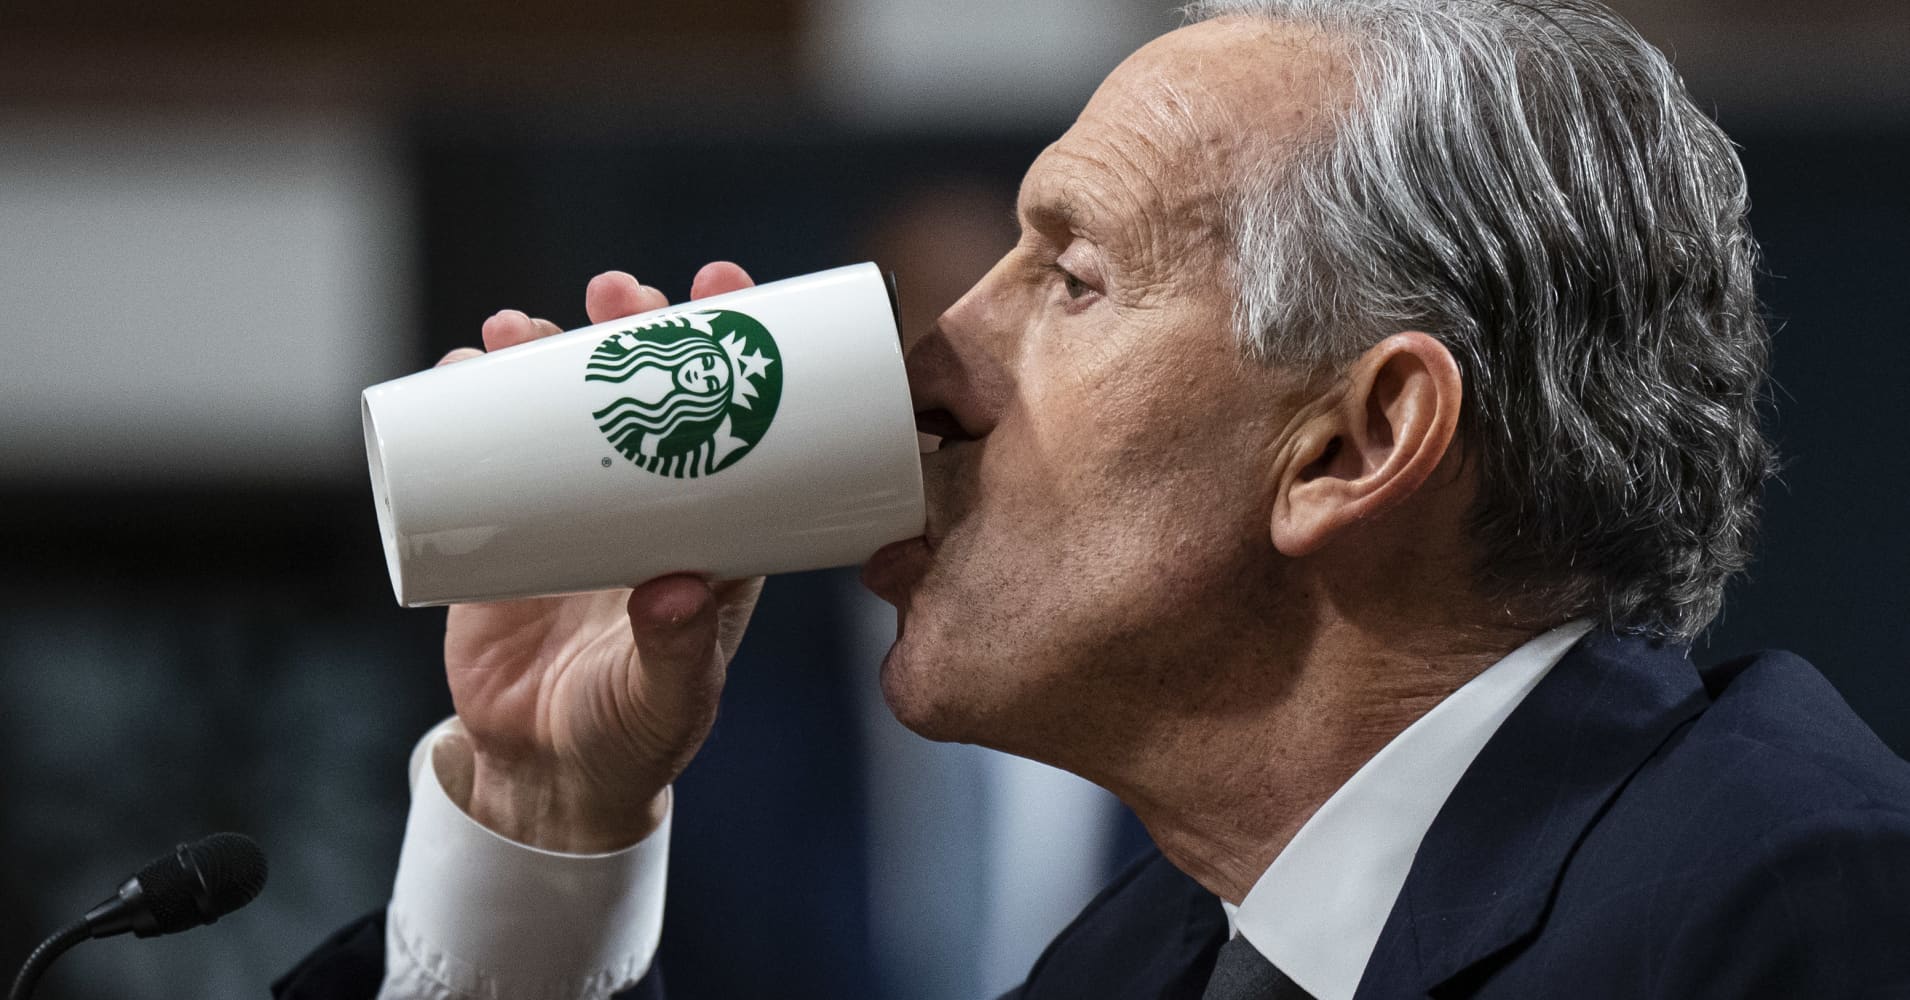 howard schultz says starbucks needs to revamp its stores after big earnings miss